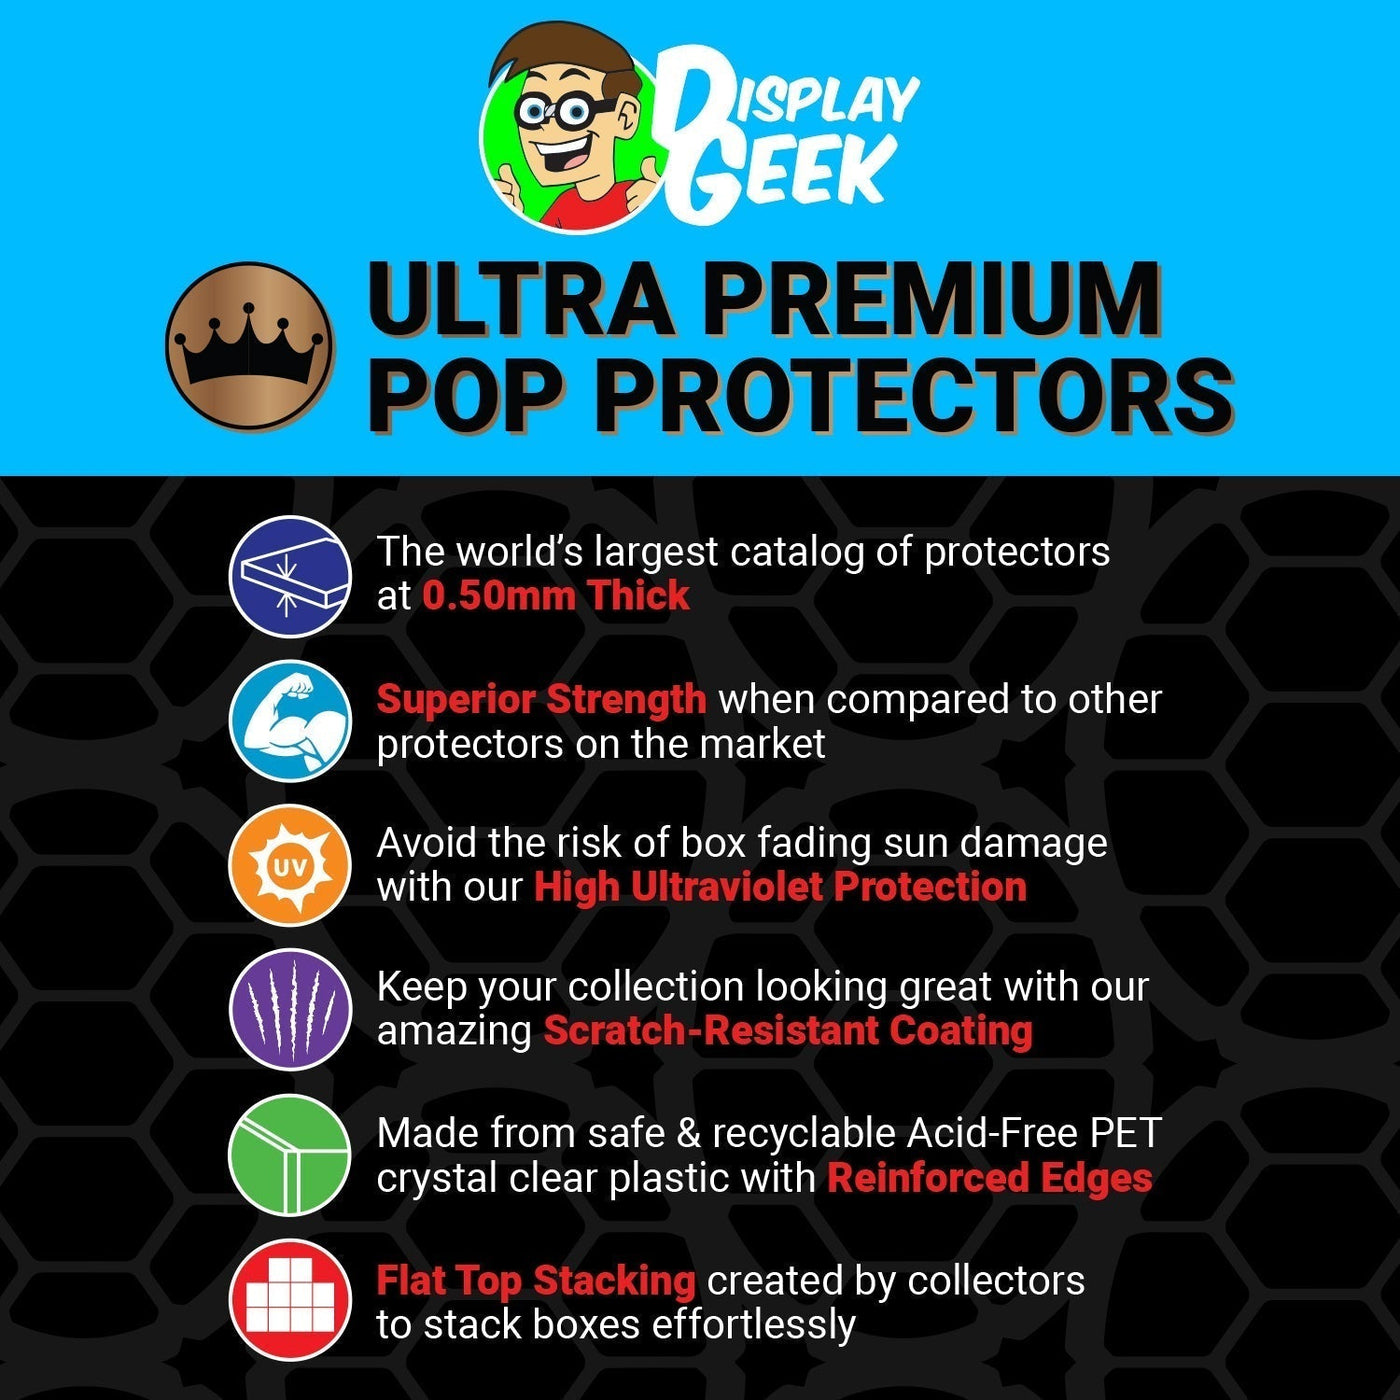 Pop Protector for Narwhal FunkO's Cereal Box on The Protector Guide App by Display Geek